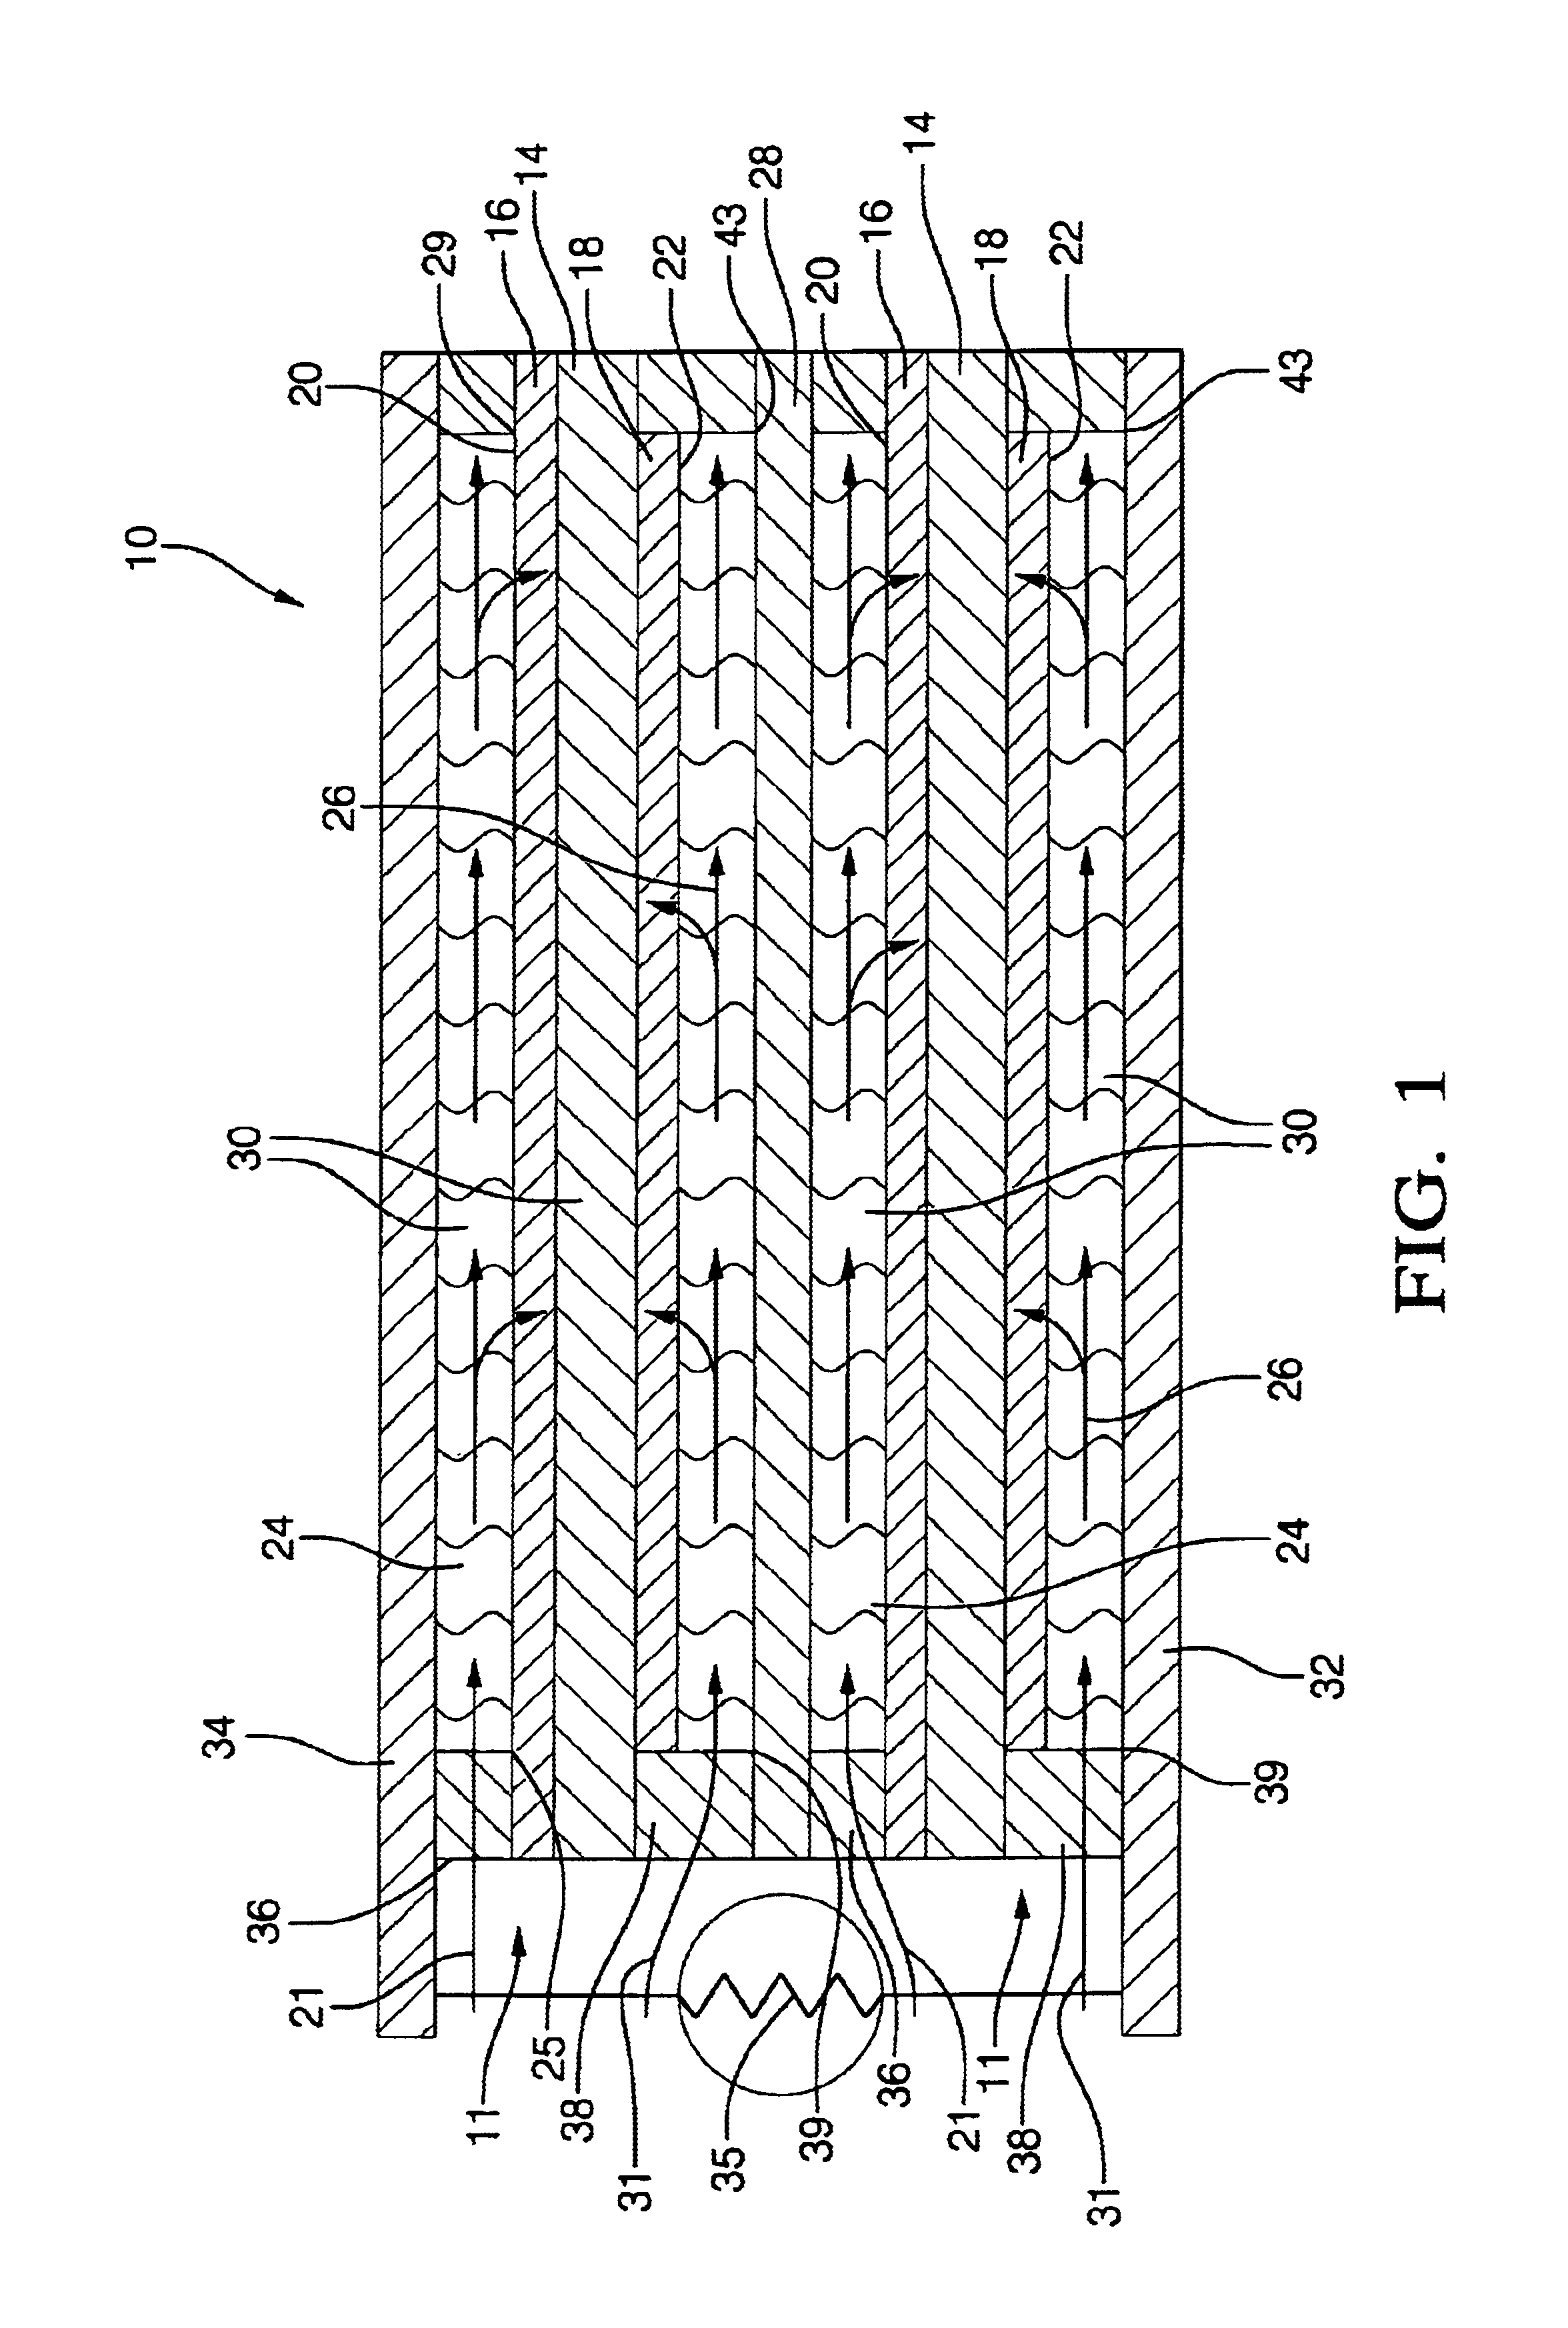 Solid-oxide fuel cell system having an integrated reformer and waste energy recovery system